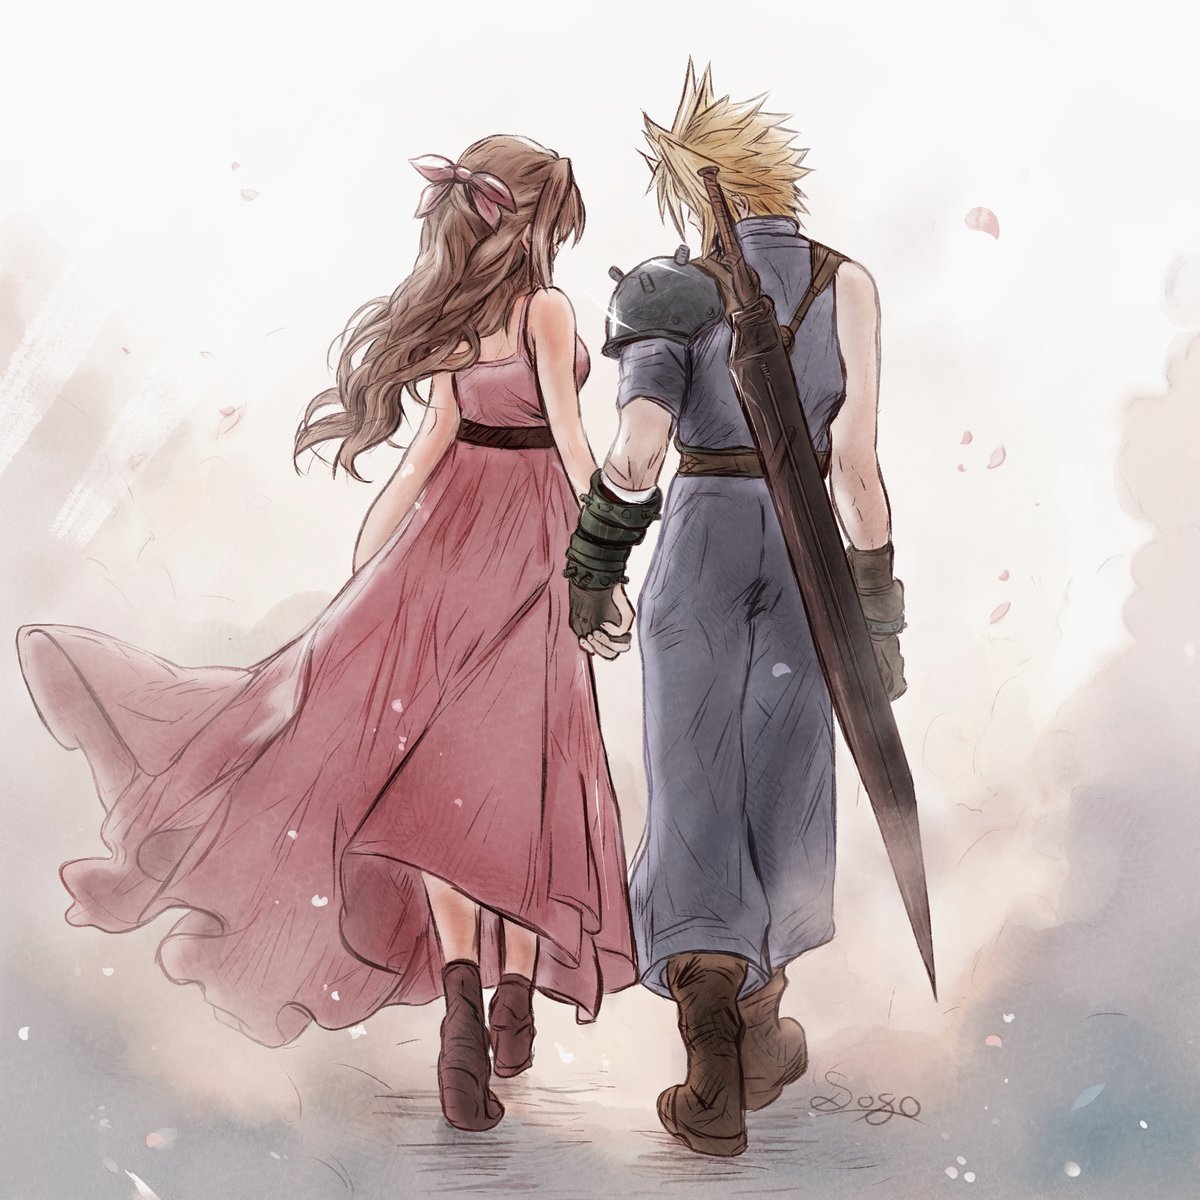 'You came for me. That’s all that matters.' 🌸 

#Clerith #FF7📷📷#FinalFantasyVII #finalfantasyart #FFVII #cleris #クラエア